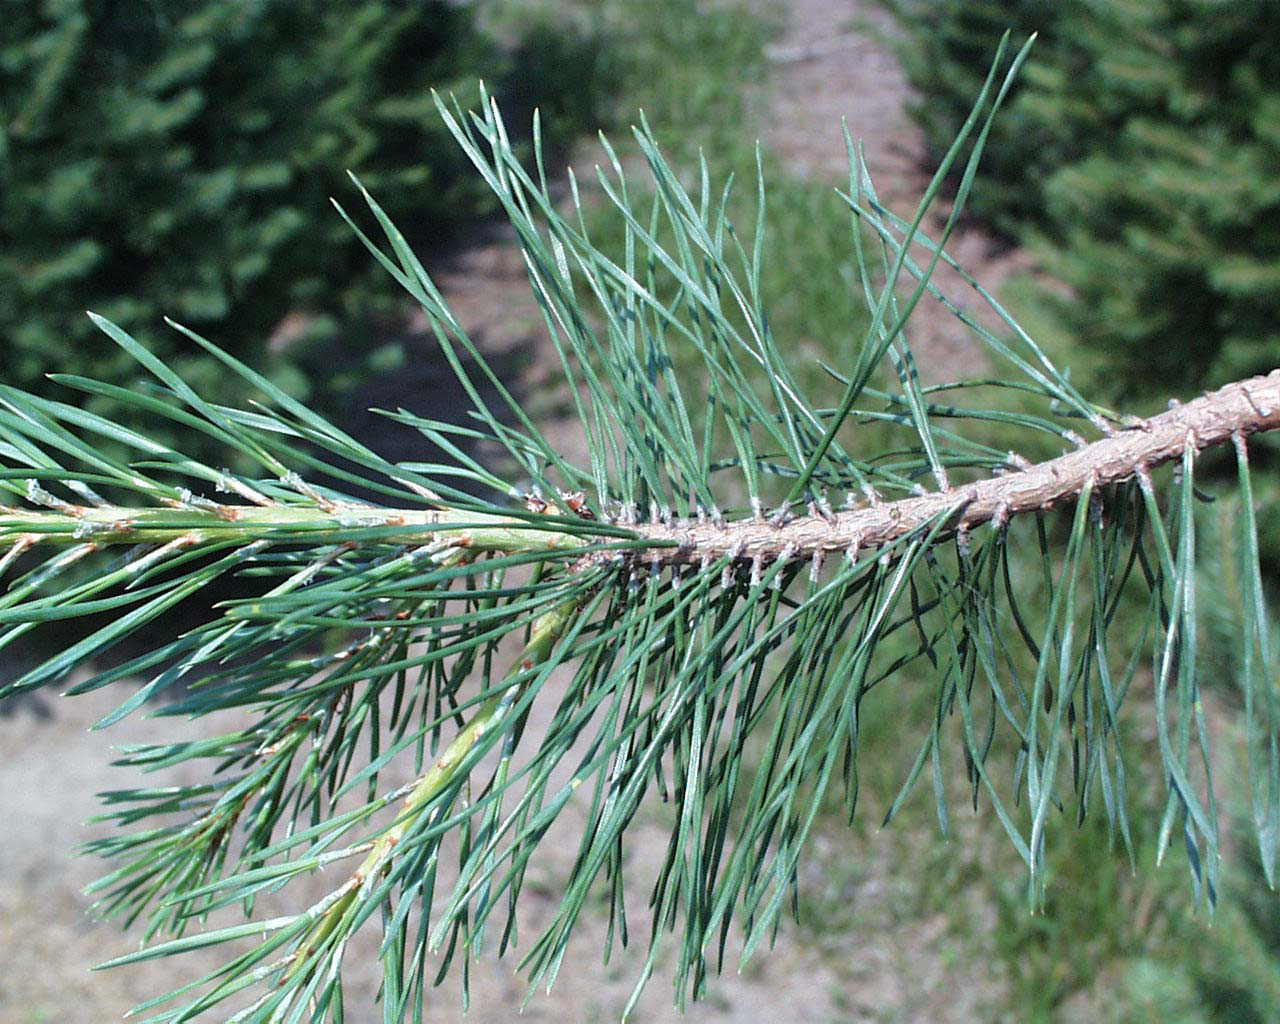 Red Pine: This conifer has needles in sets of two, which identifies it as one of the red pines.